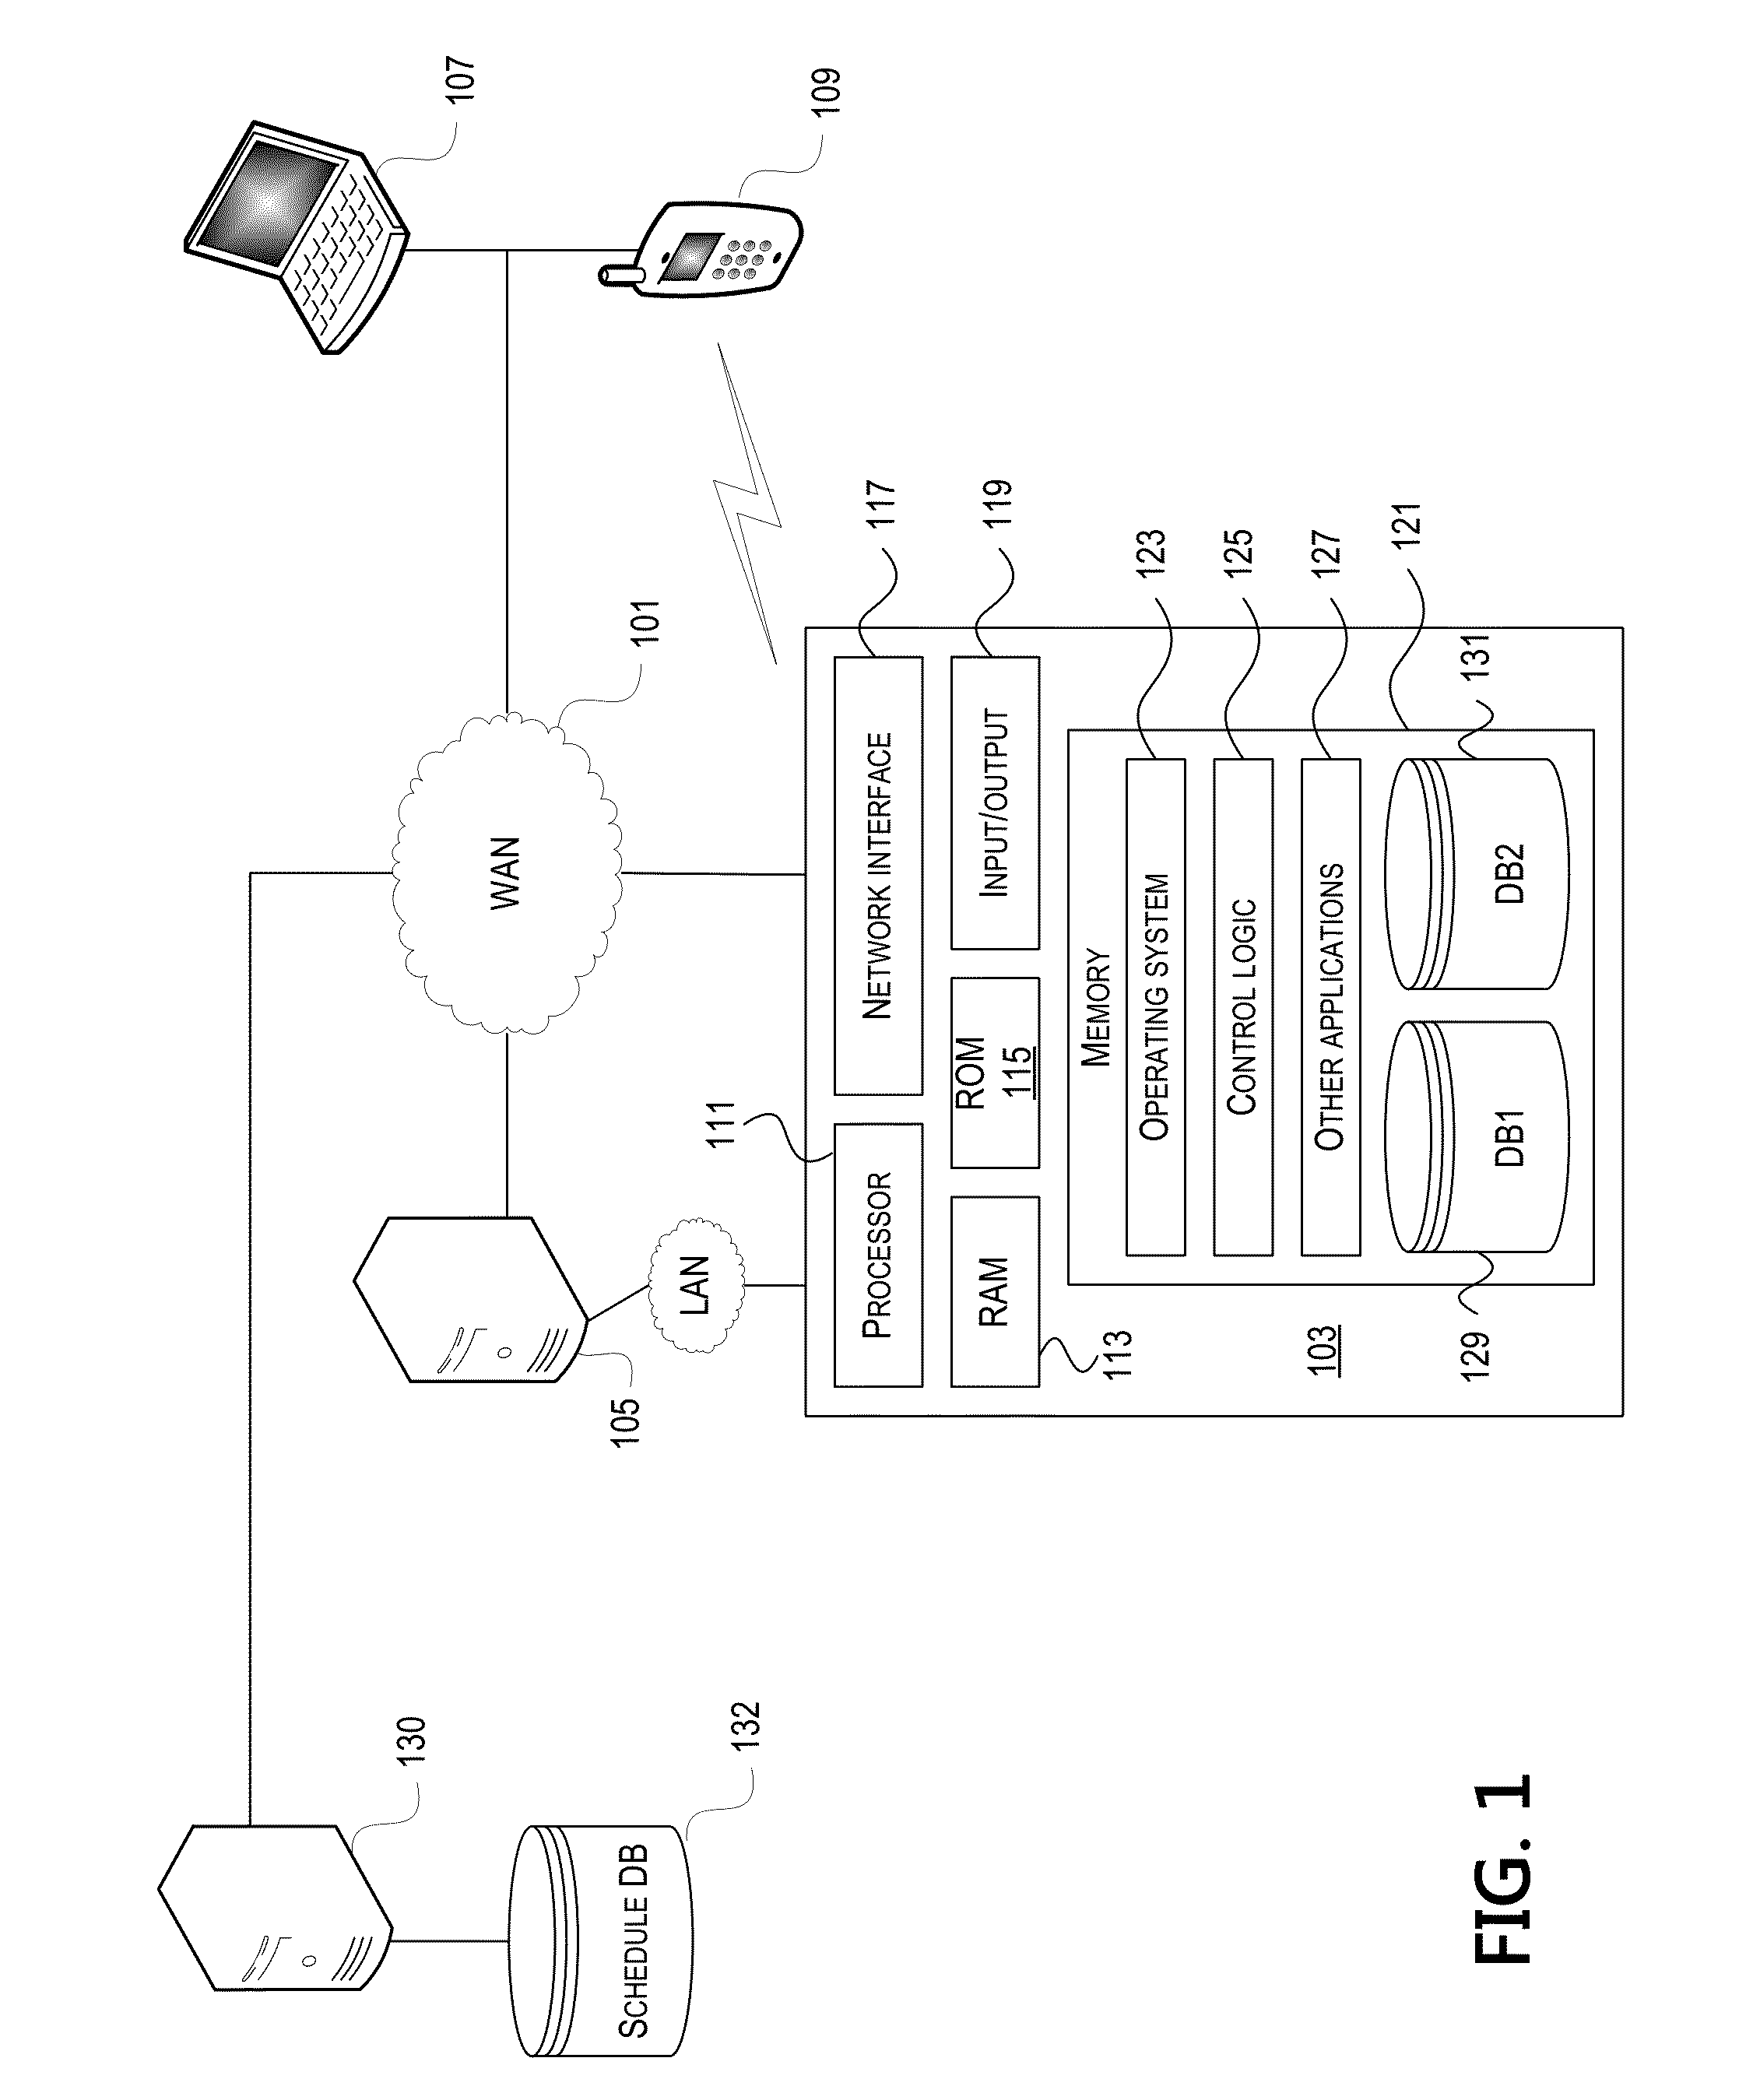 Geospatial construction task management system and method